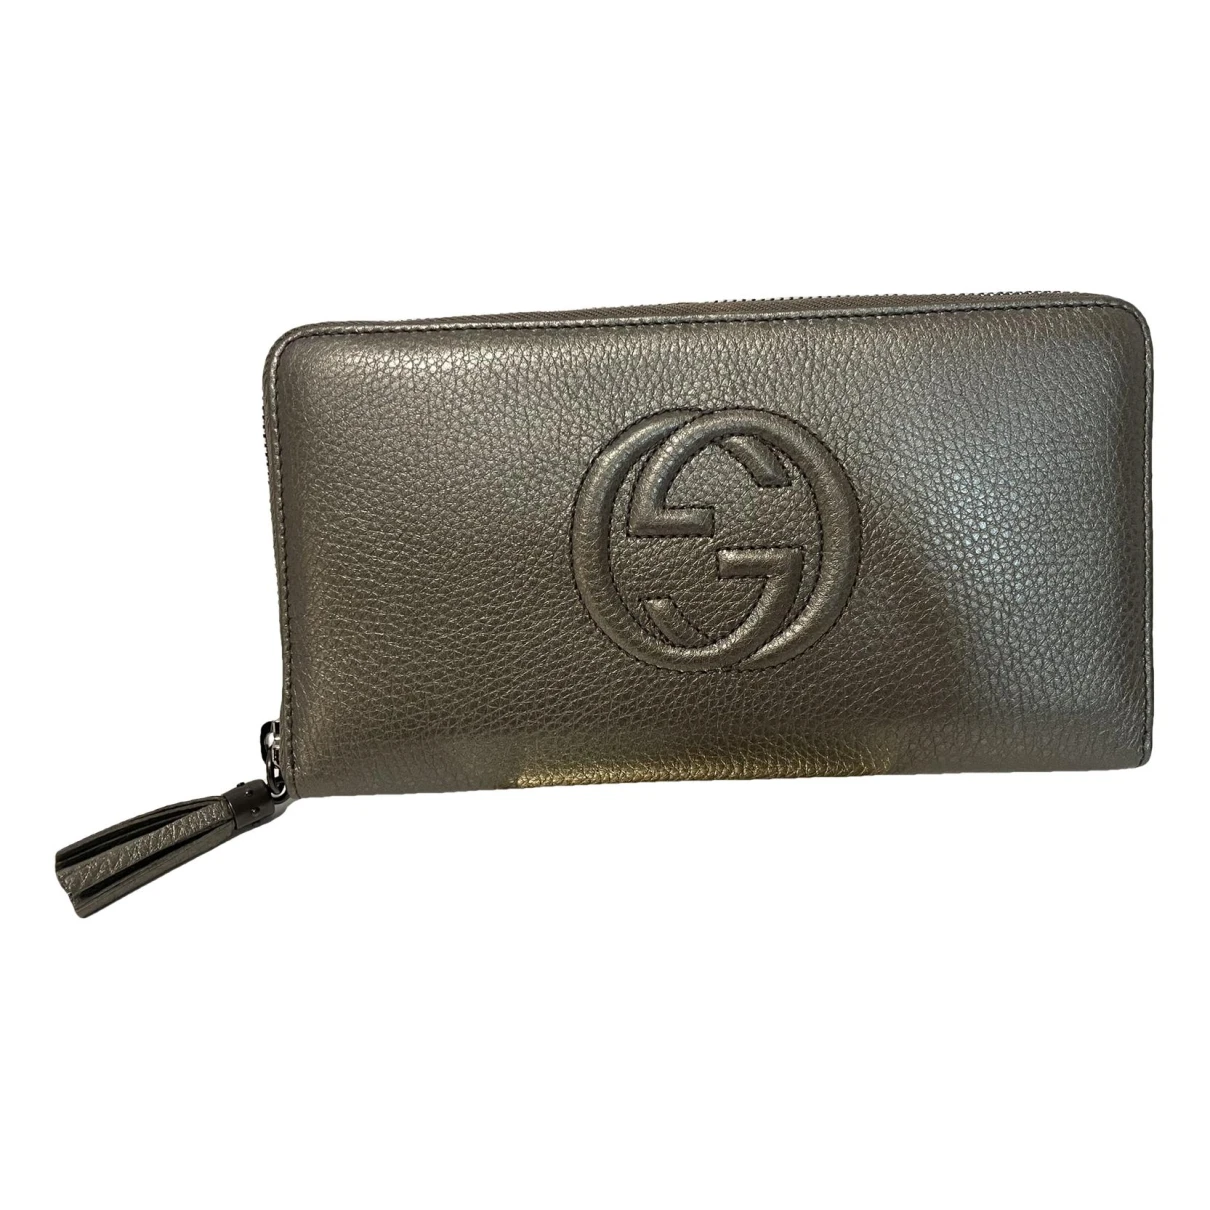 Pre-owned Gucci Soho Leather Wallet In Metallic